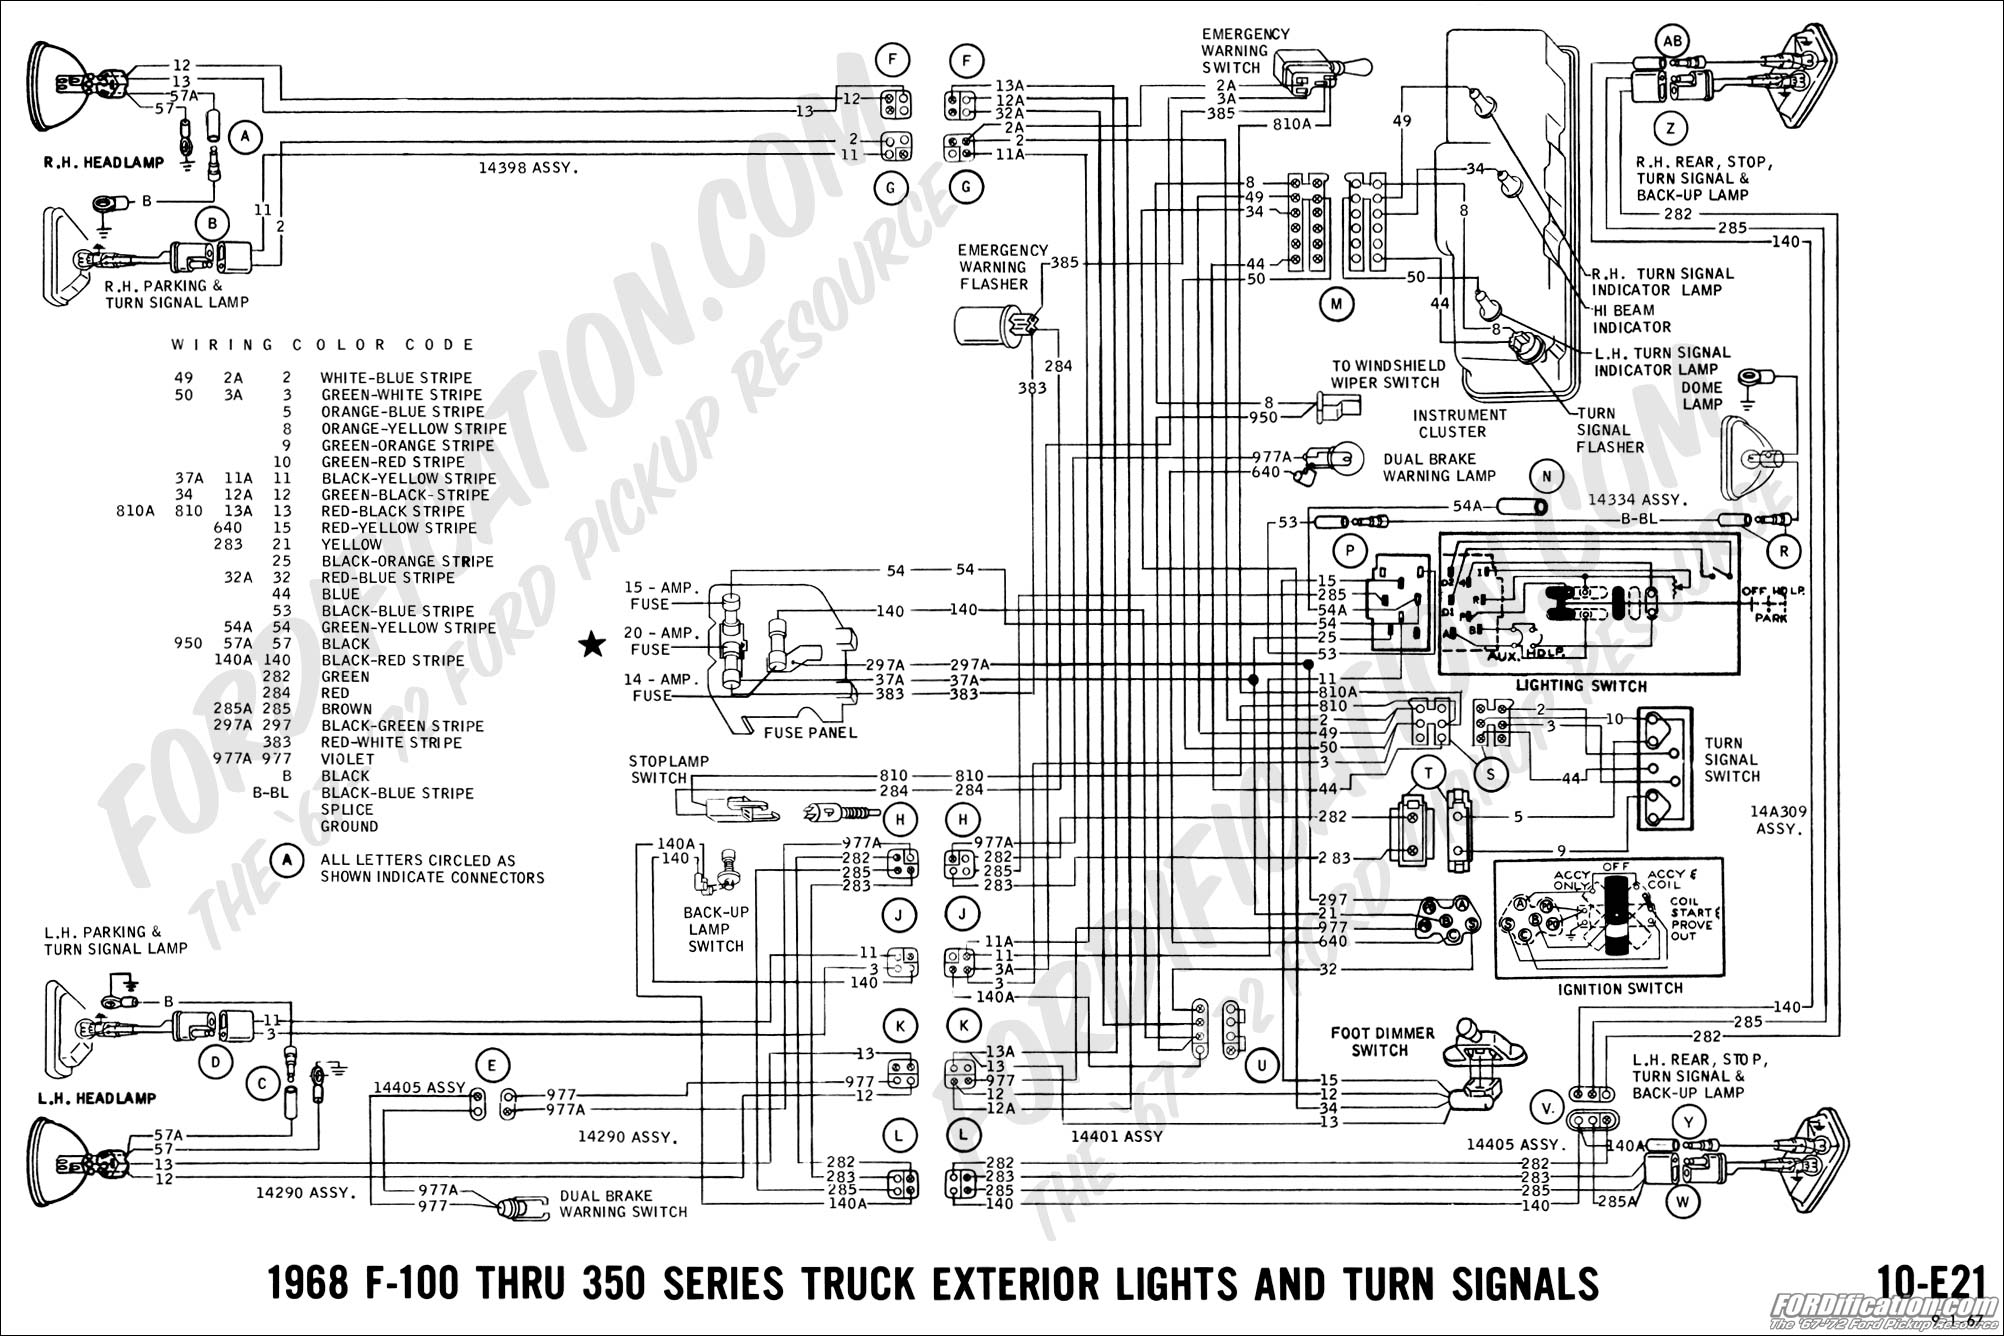 1966 Mustang Headlight Switch Wiring Diagram from ww.fordification.com